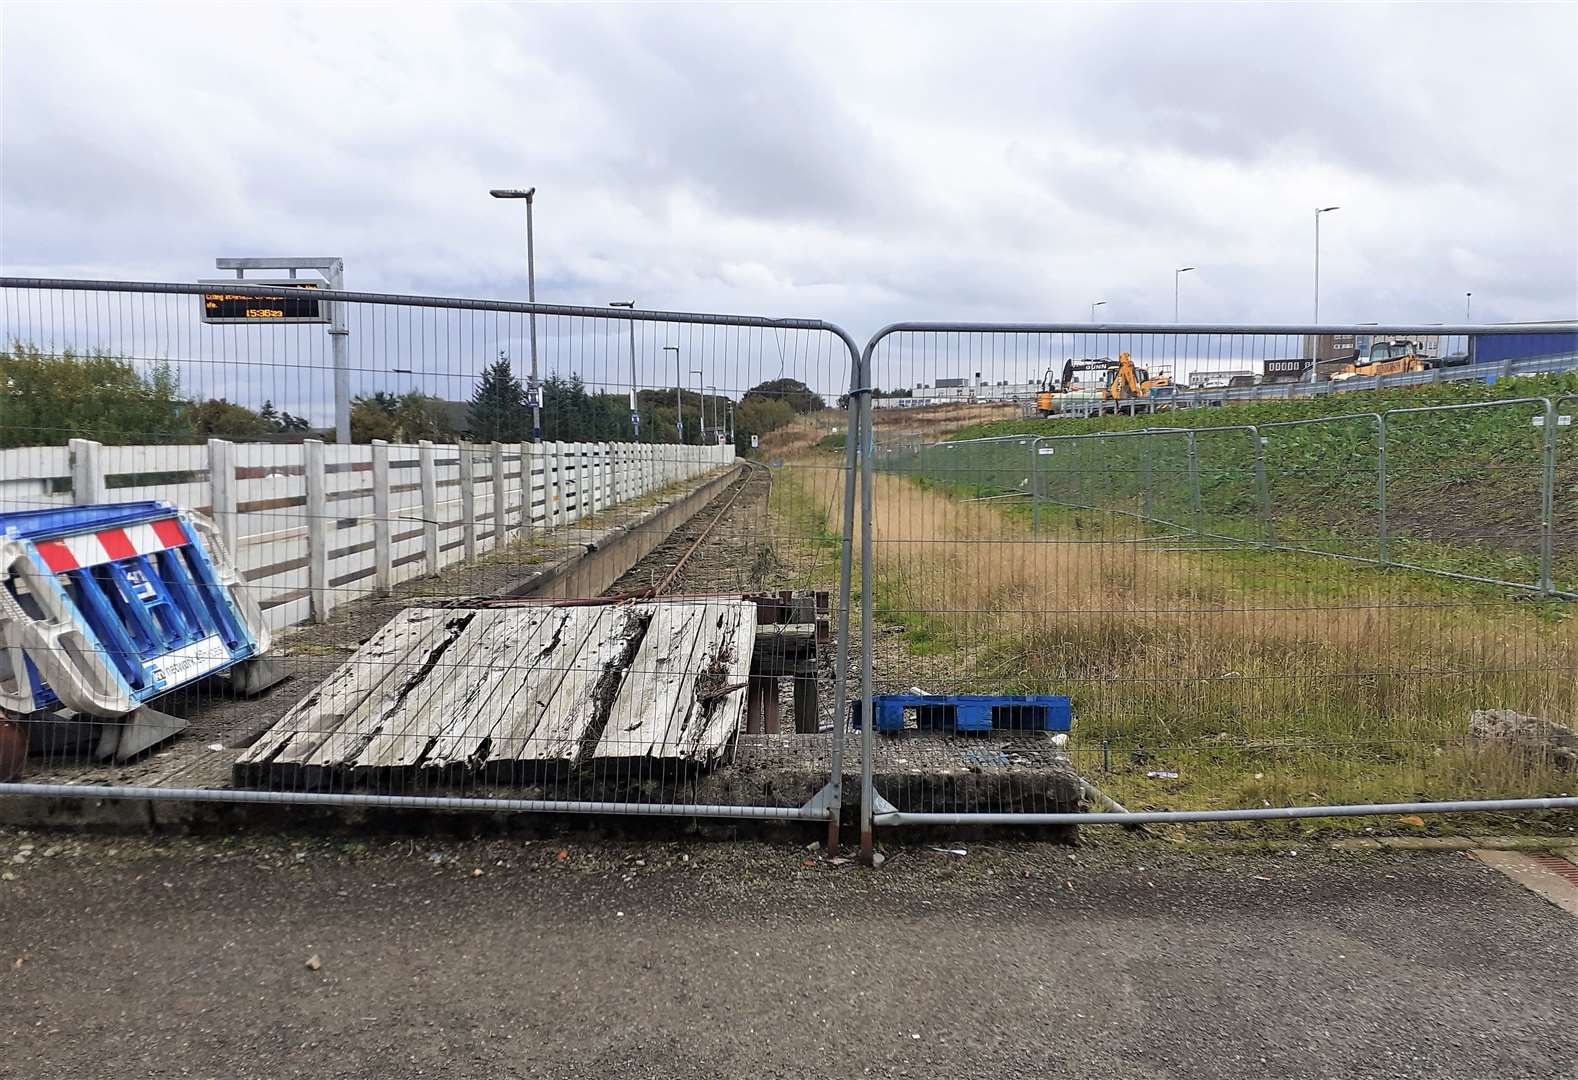 The 'eyesore parcel of ground' would be ideal as a parking area for rail passengers, said Mr Glasgow.. Picture: Alexander Glasgow